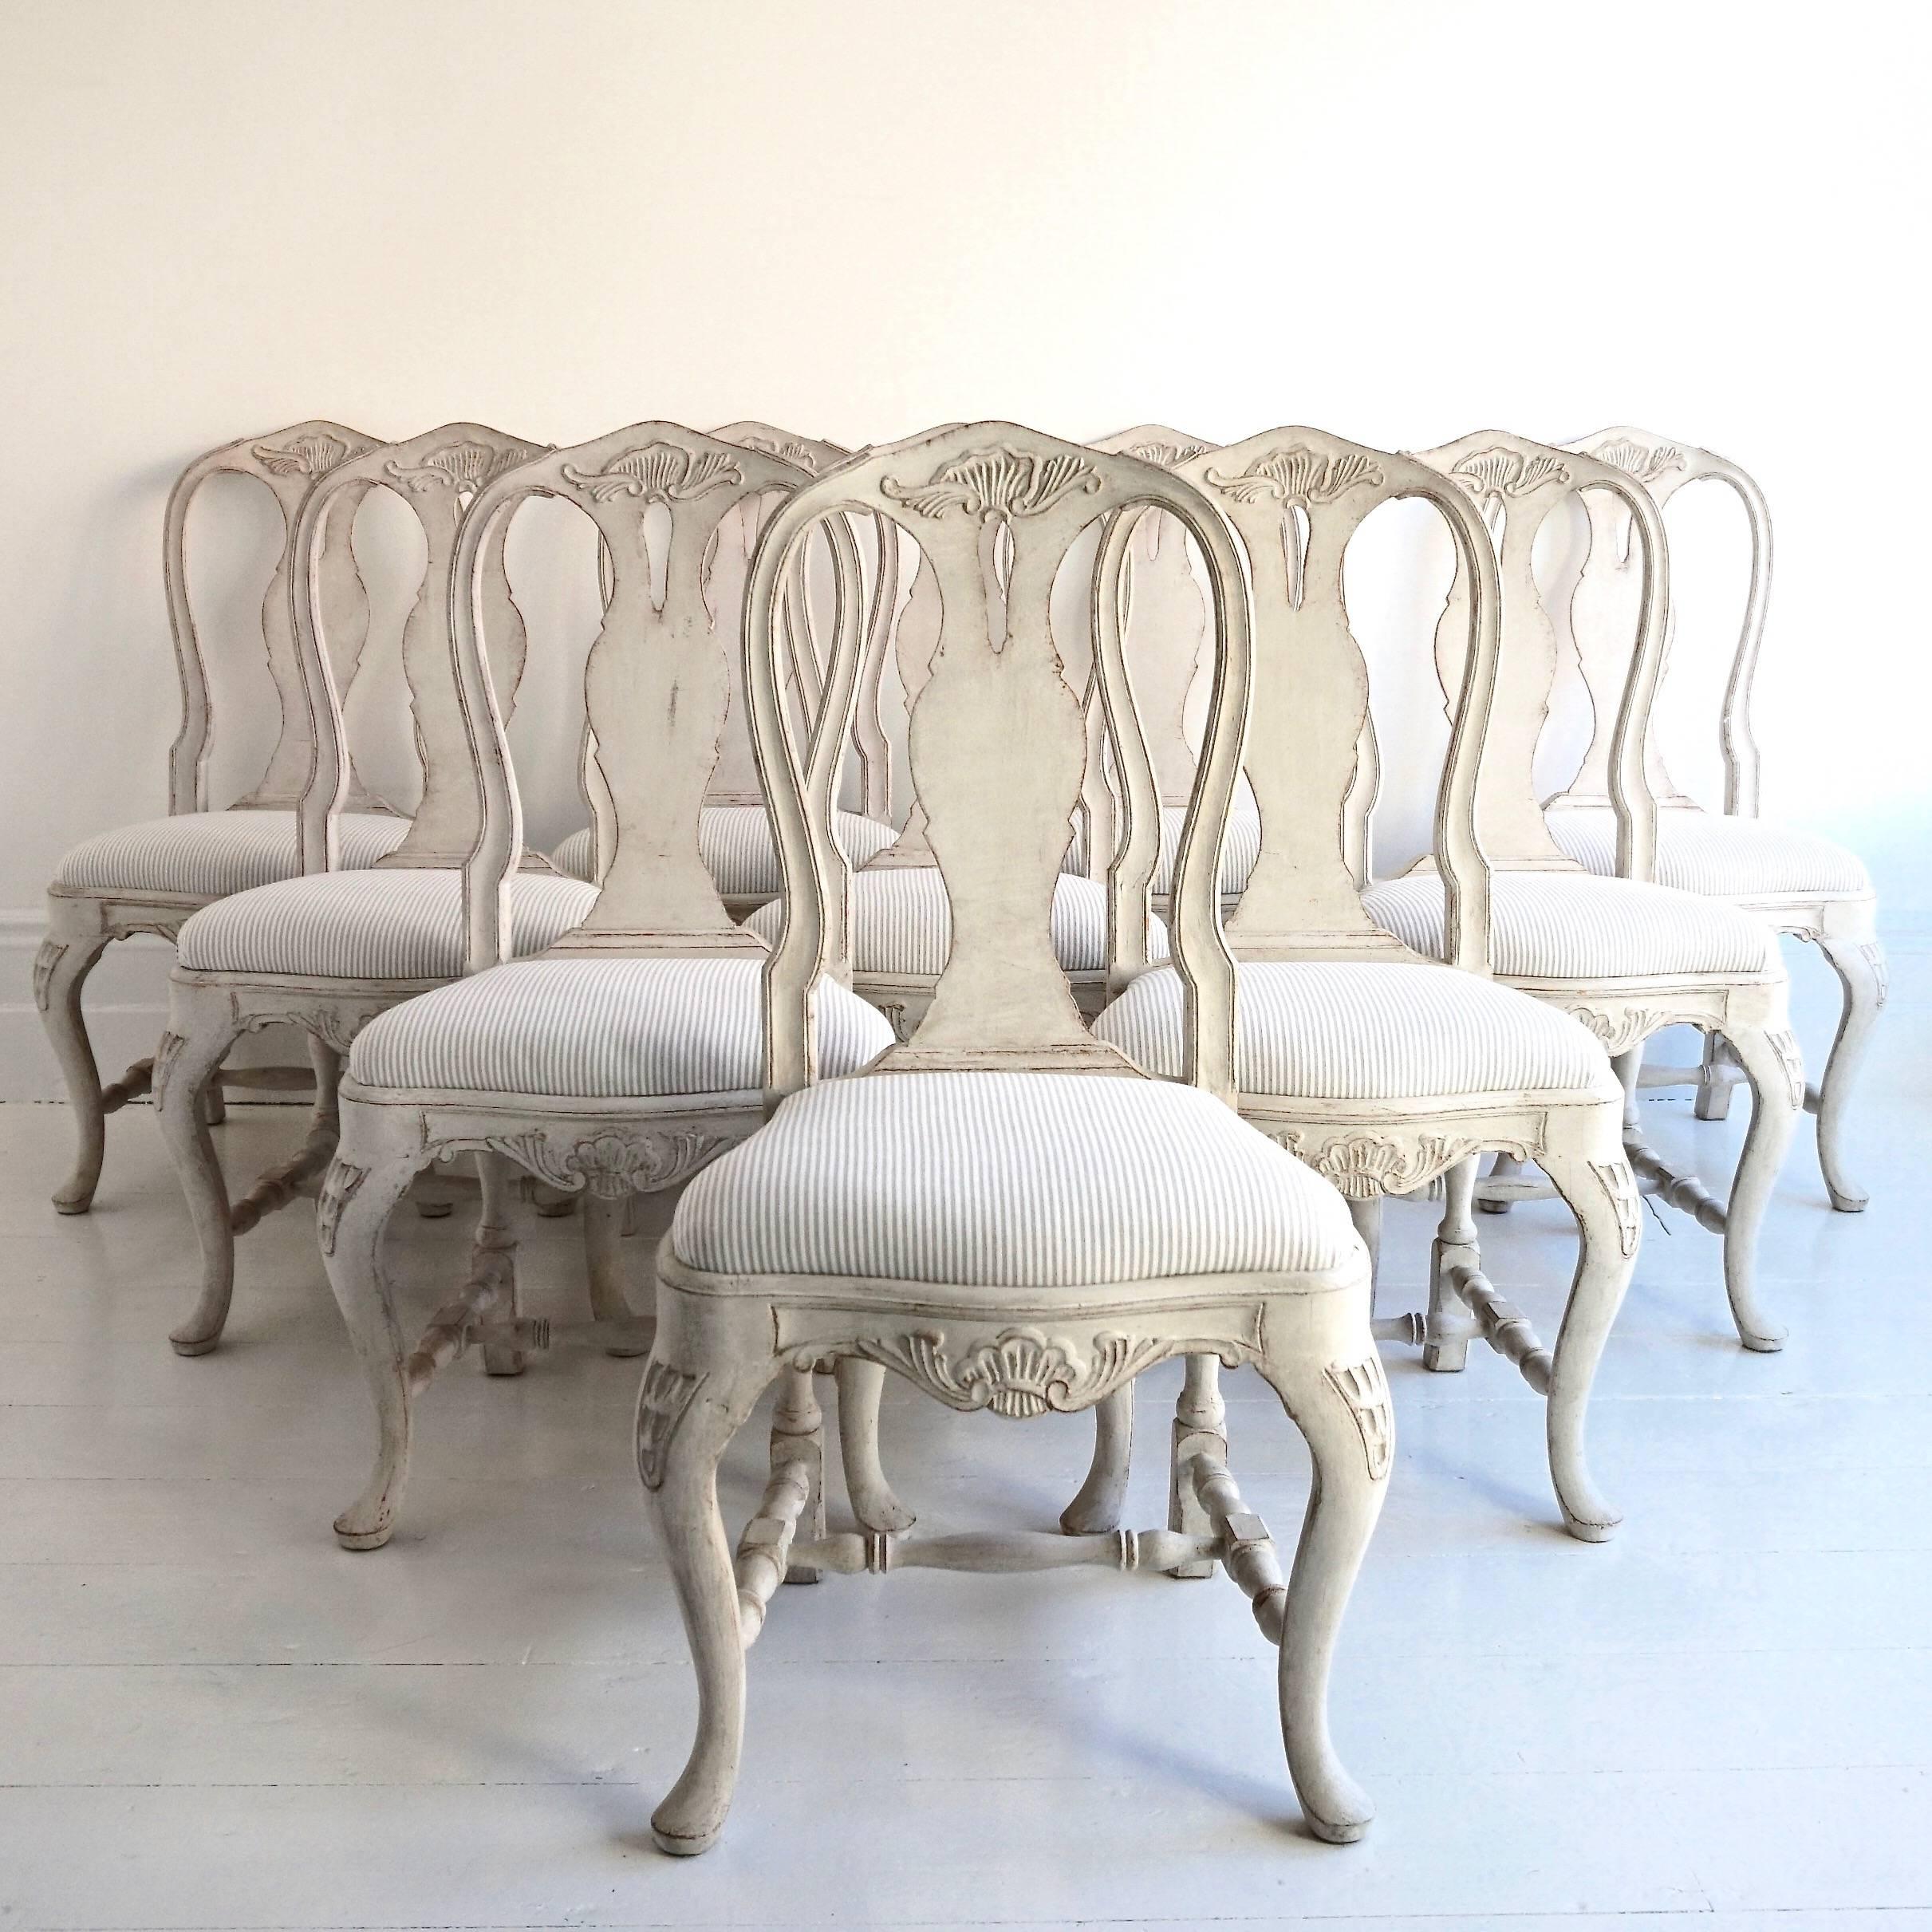 A magnificent set of ten very fine and richly carved Rococo style dining chairs, recently upholstered in a beautiful Romo ticking stripe, Swedish, circa 1910.
   